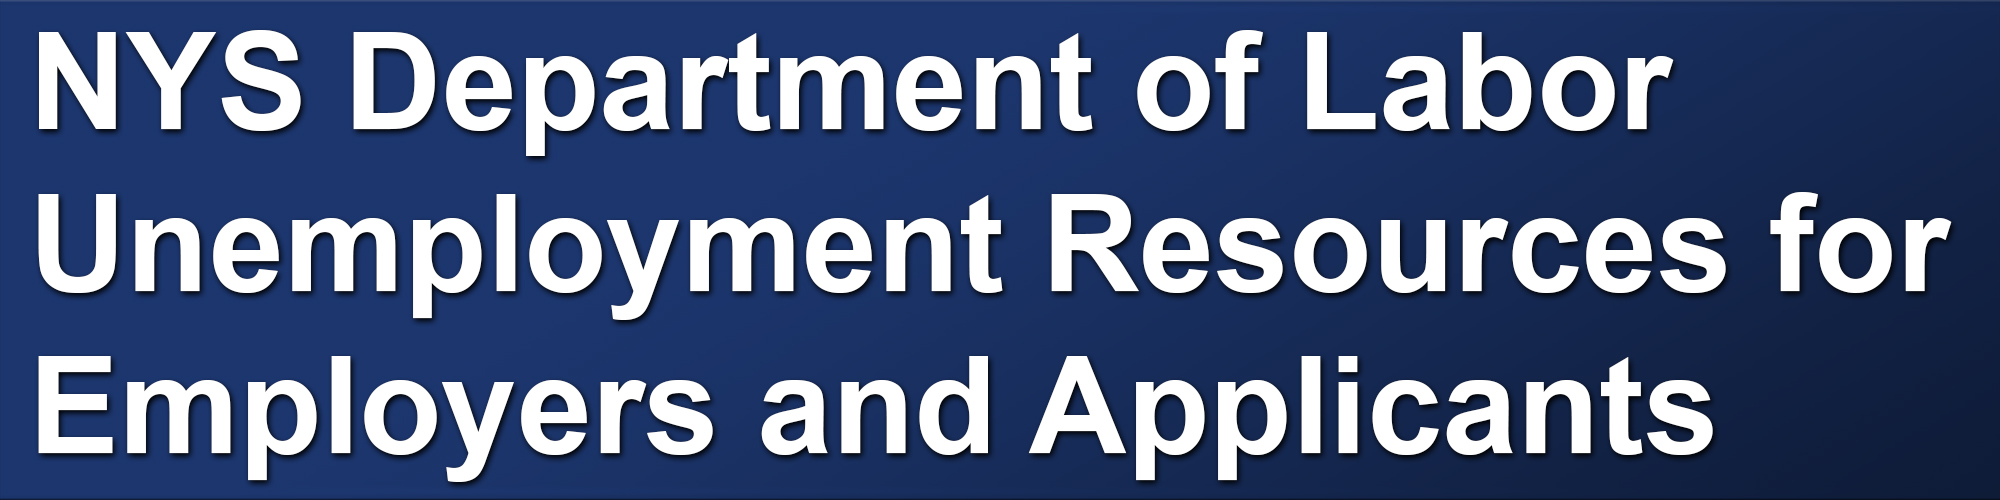 NYS Department of Labor Unemployment Resources for Employers and Applicants